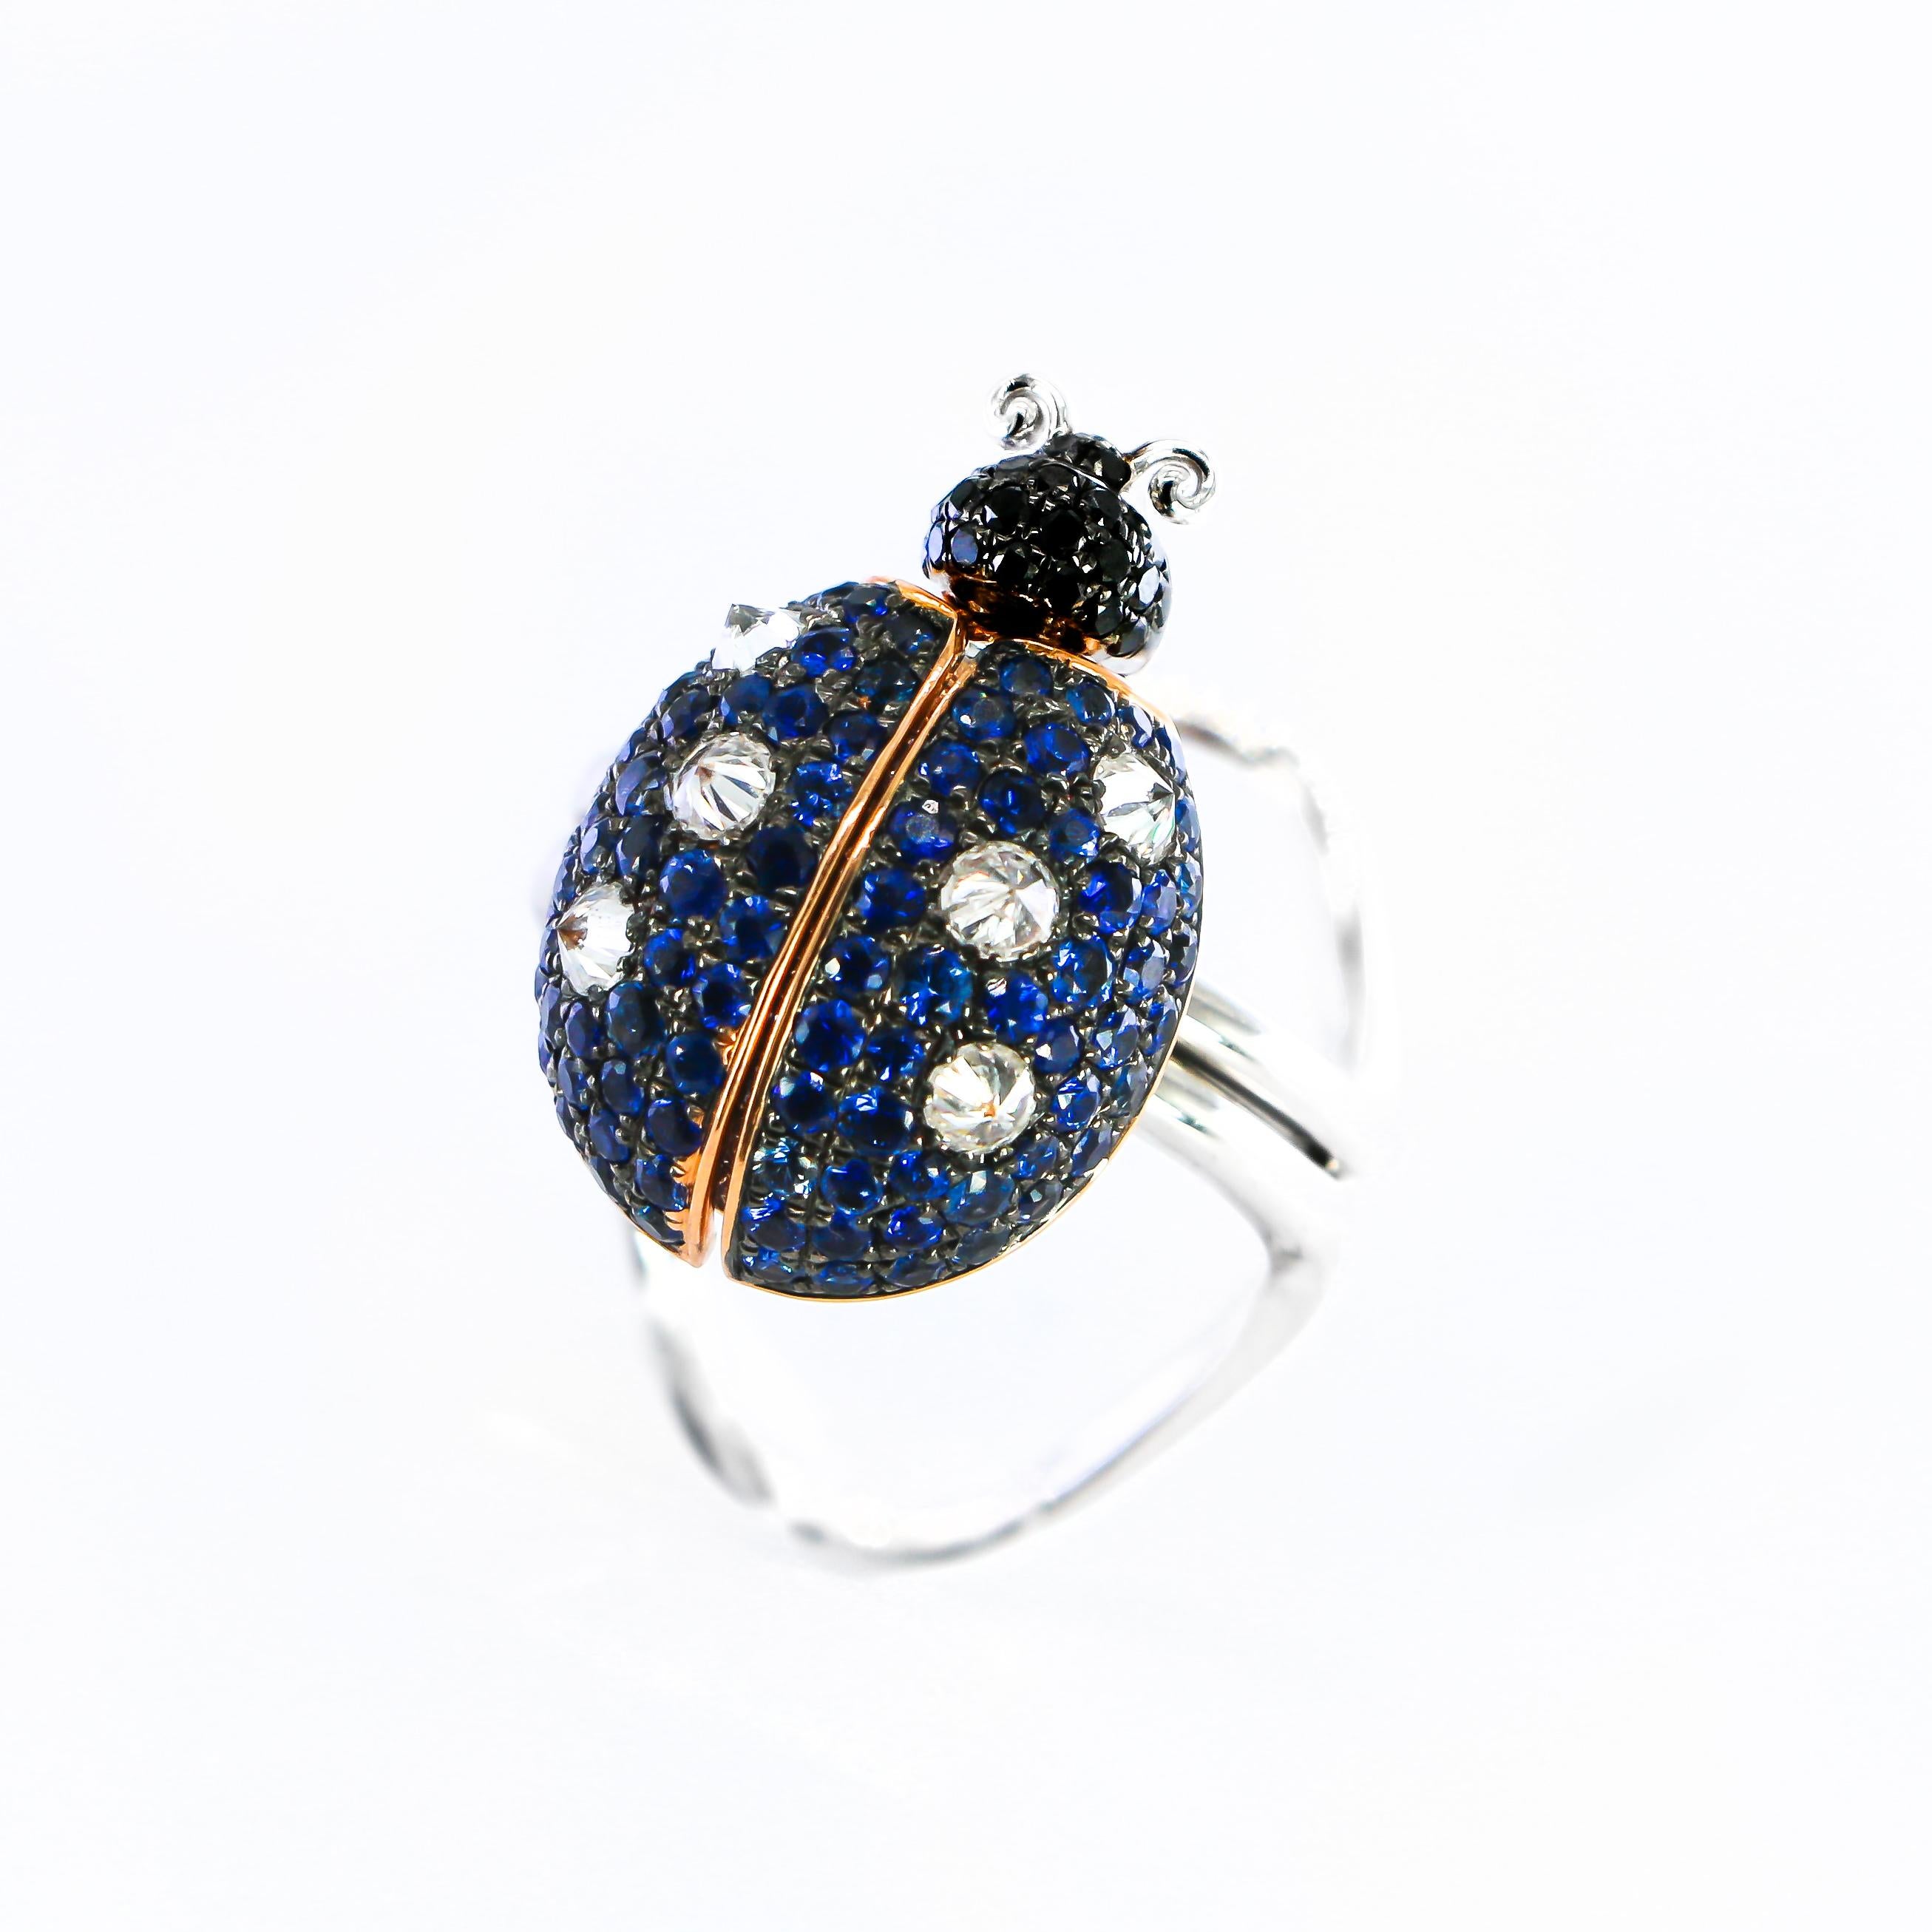 Round Cut Ladybug Ring with Moving Parts Sapphires 1.73 Carat and Diamonds 1.18 Carat